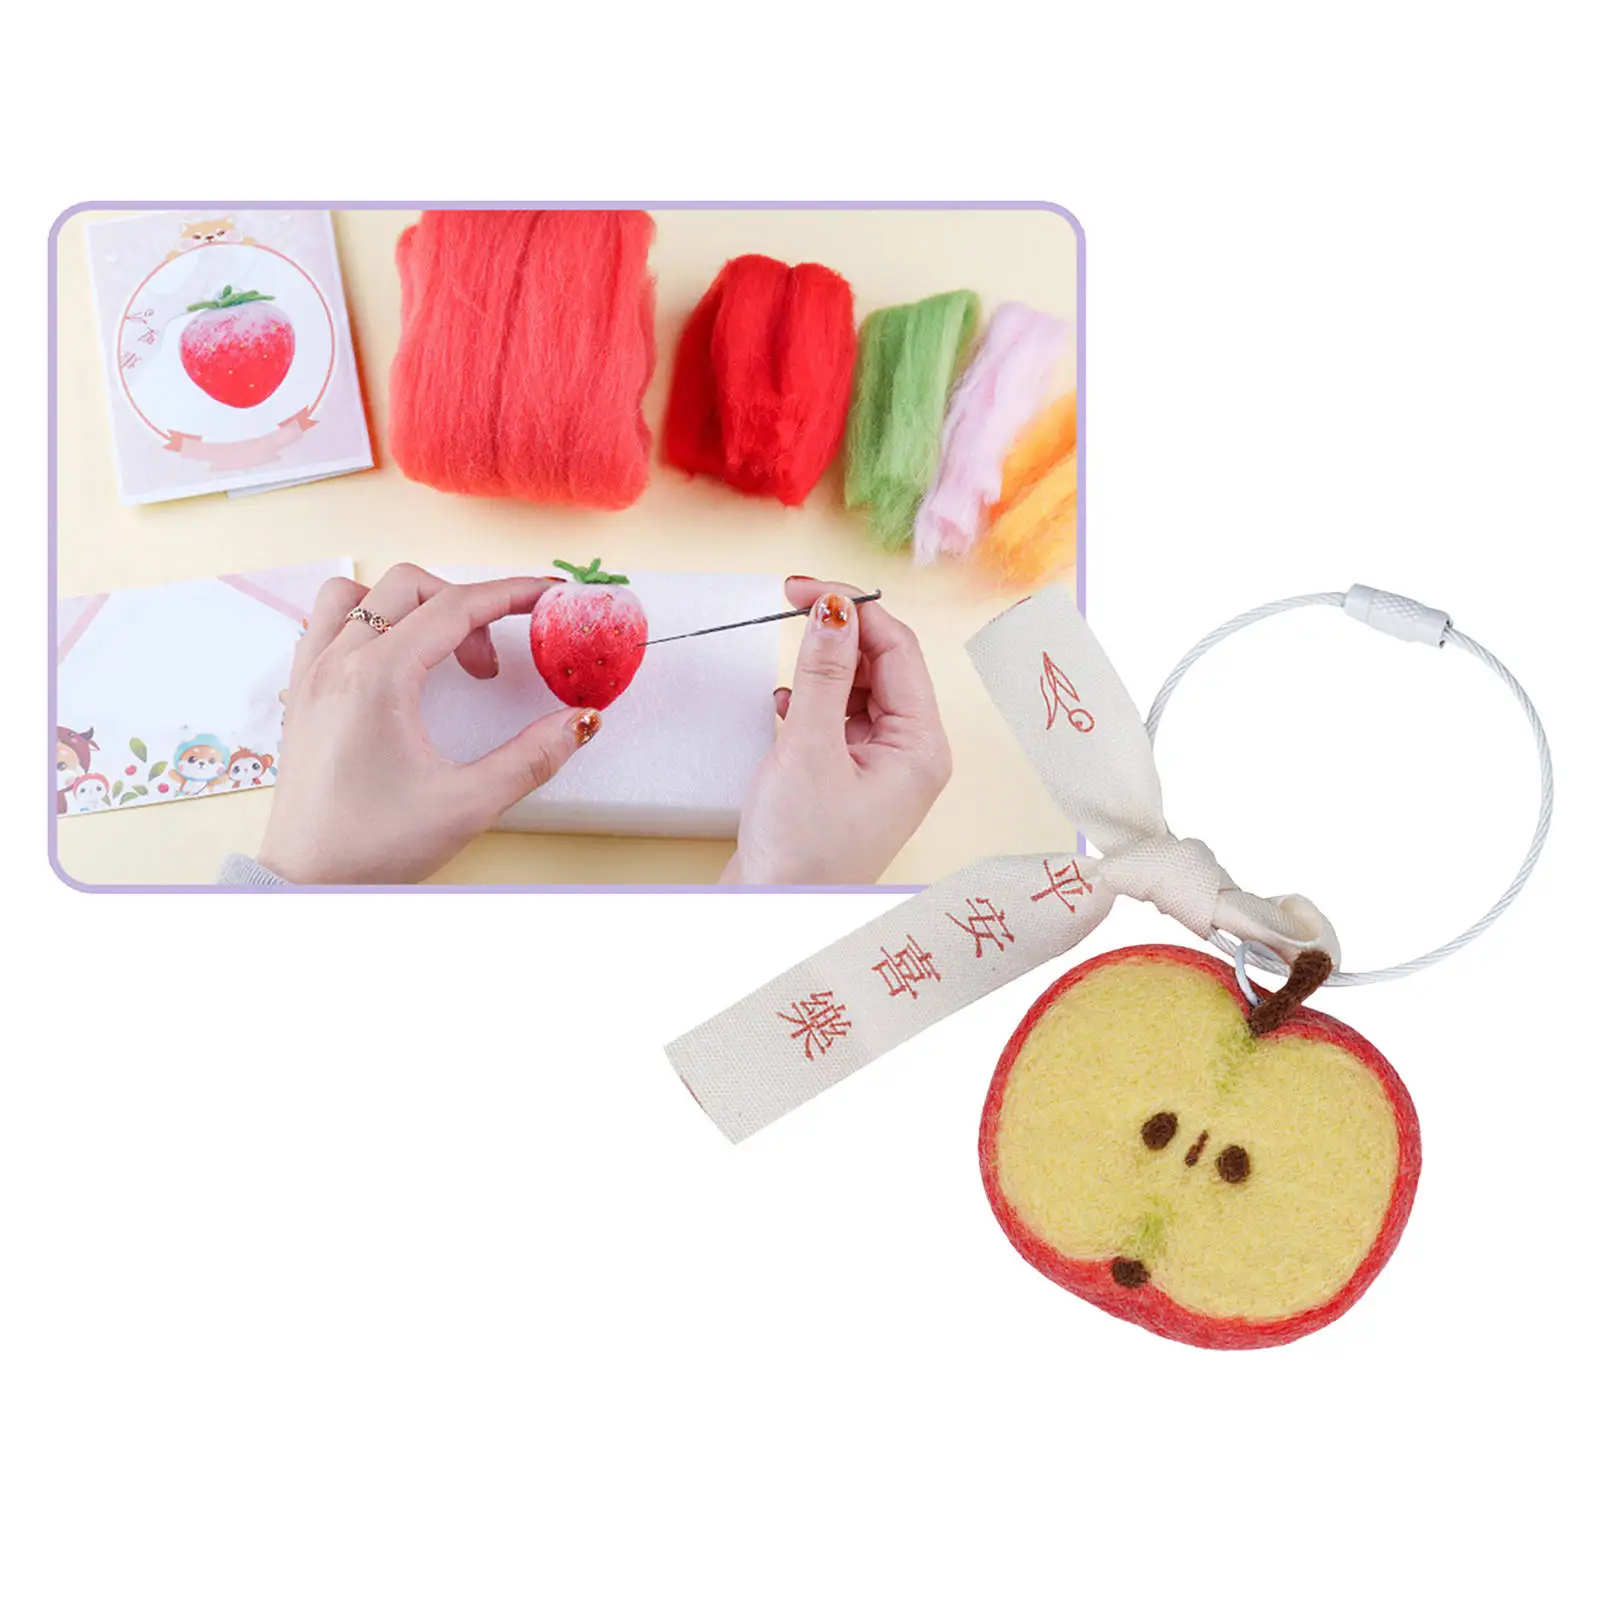 Needle Felting Starter Kit Wool Felting Supplies Non-Finished Poked Craft Material for Adult Kids